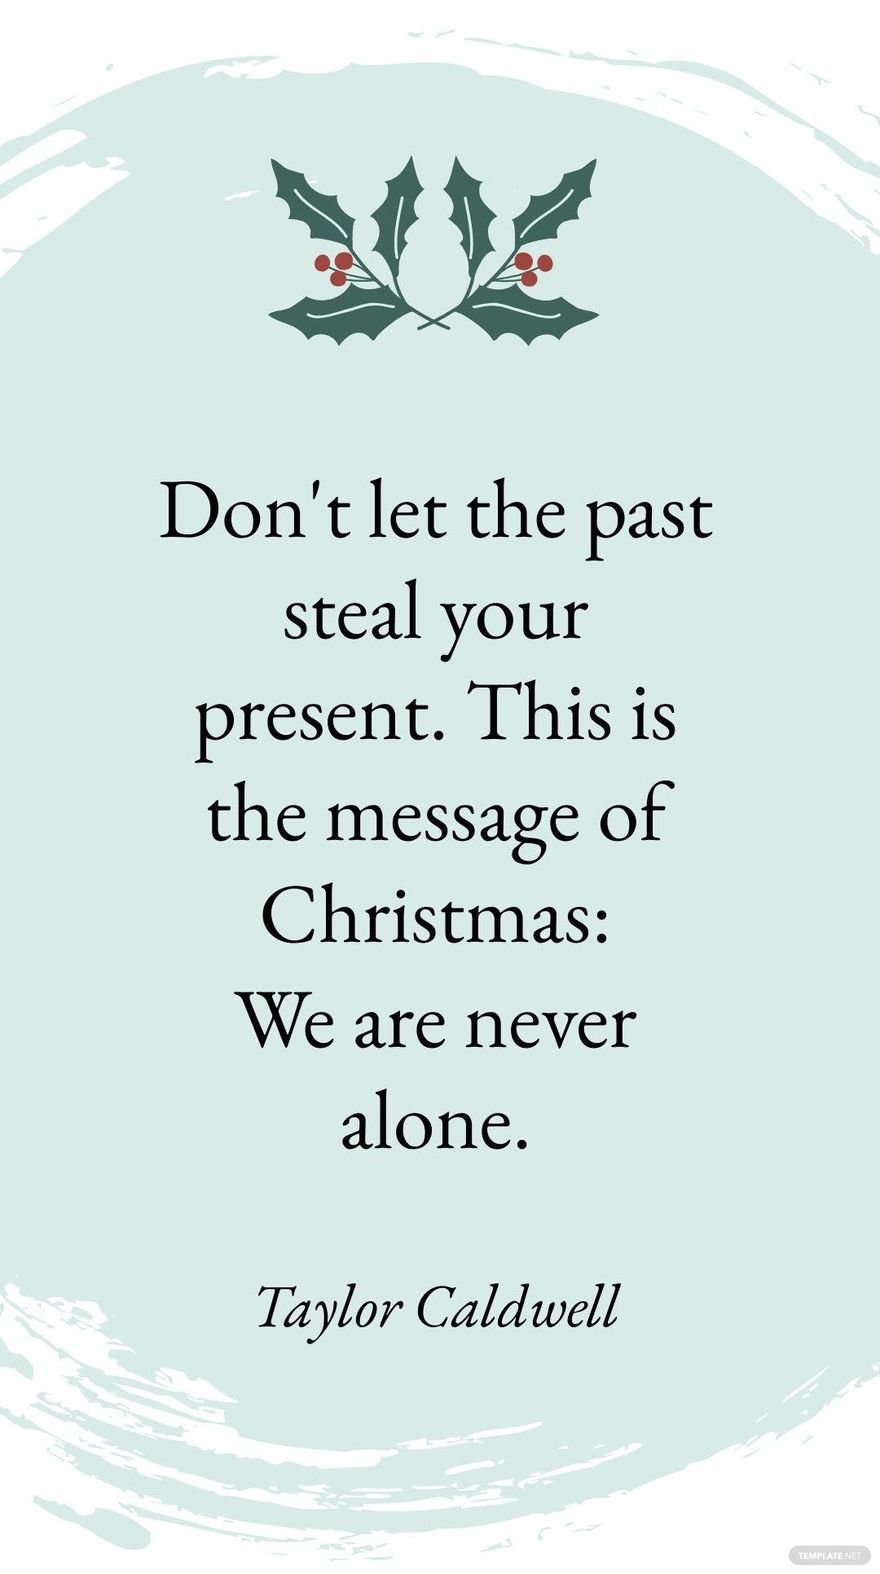 Free Taylor Caldwell - Don't let the past steal your present. This is the message of Christmas: We are never alone.